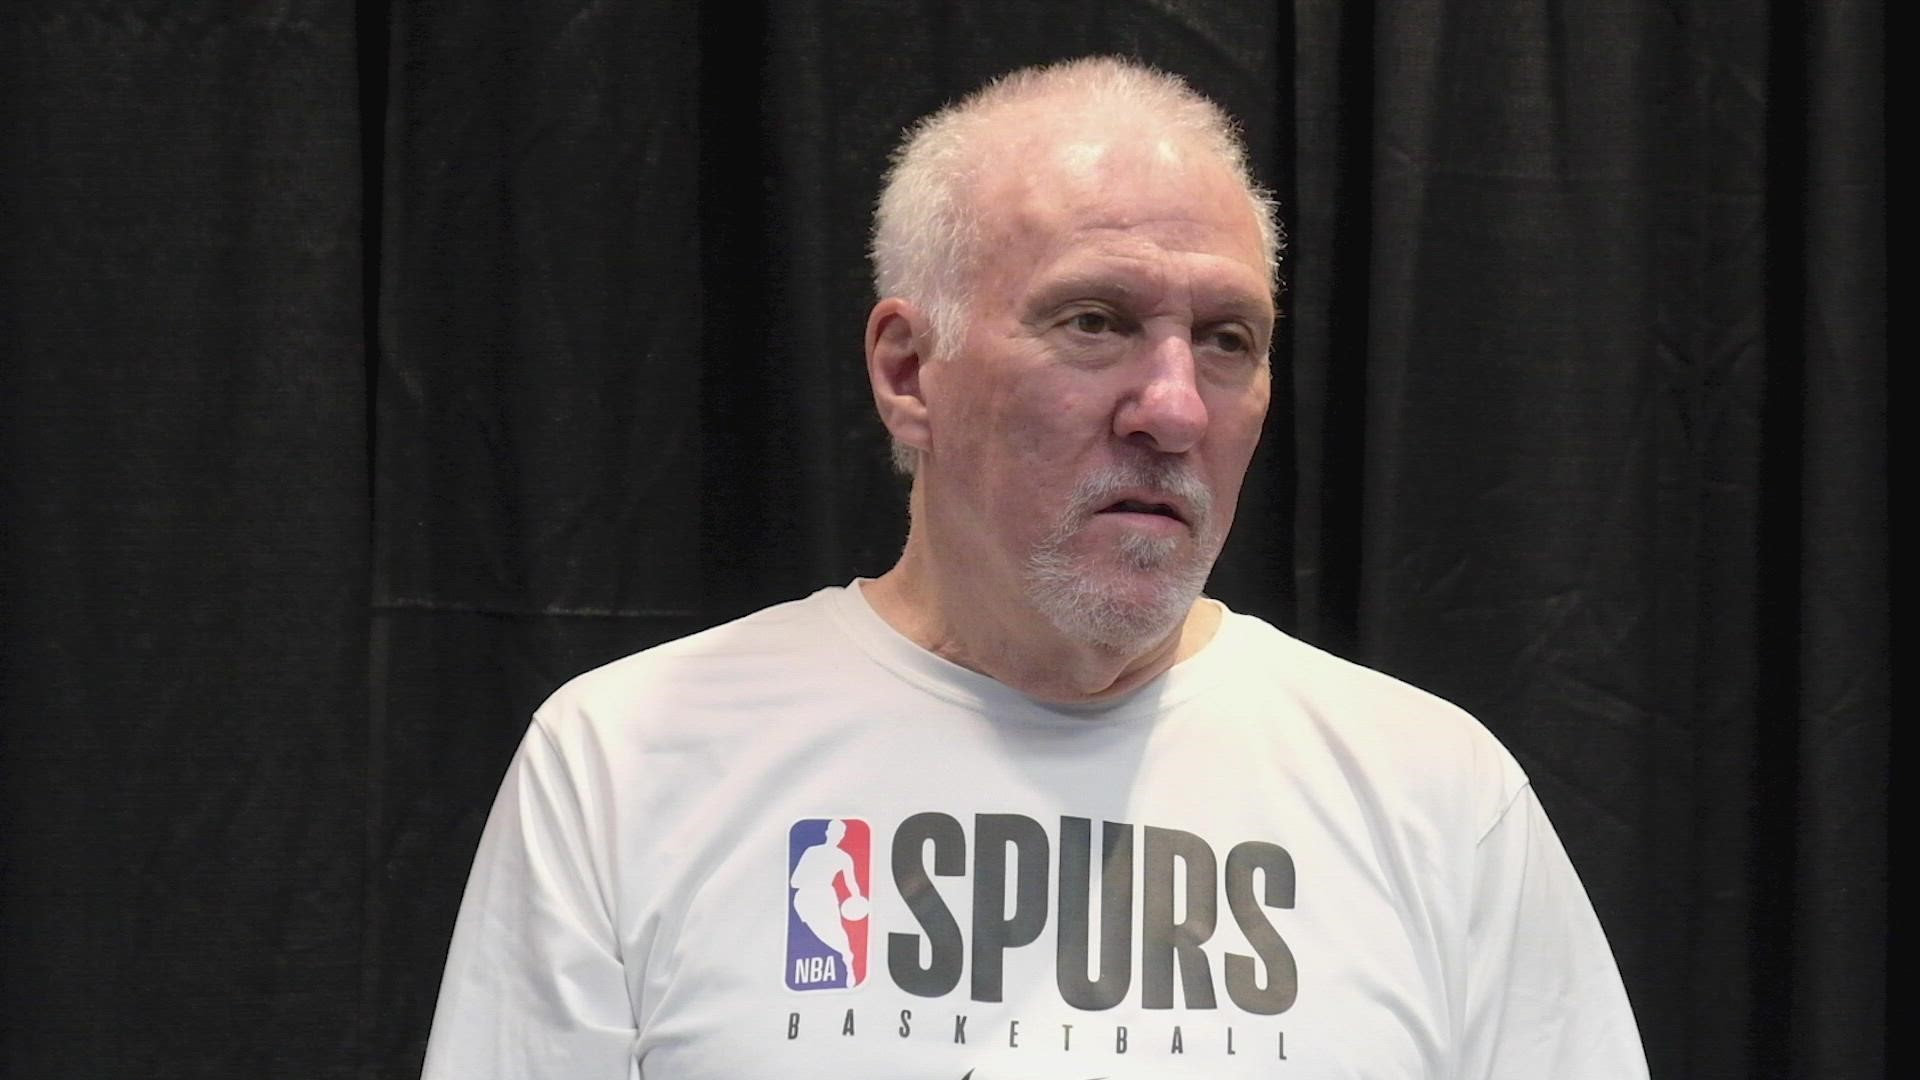 Popovich reacted to Steve Kerr being named his replacement, and said he expects Zach Collins to return to the court in the next few months.